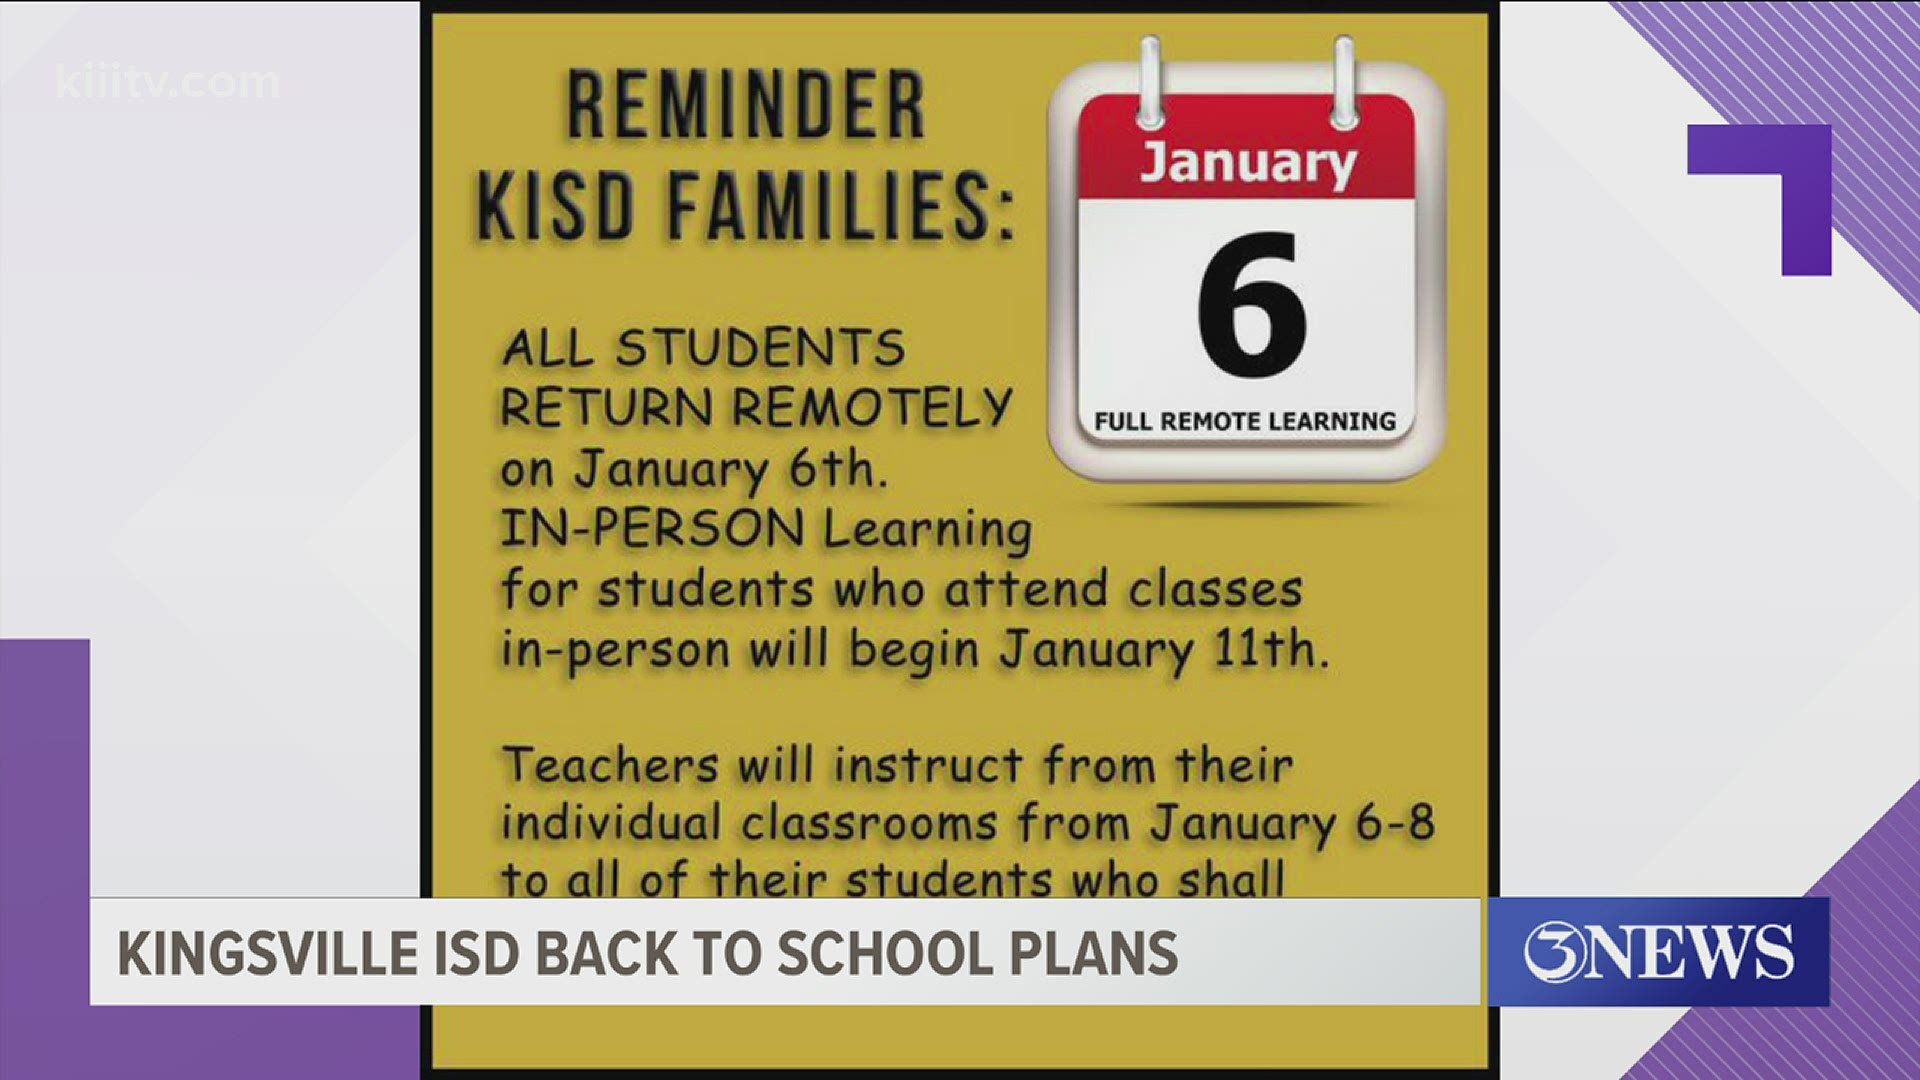 The district reminding families about post holiday plans.